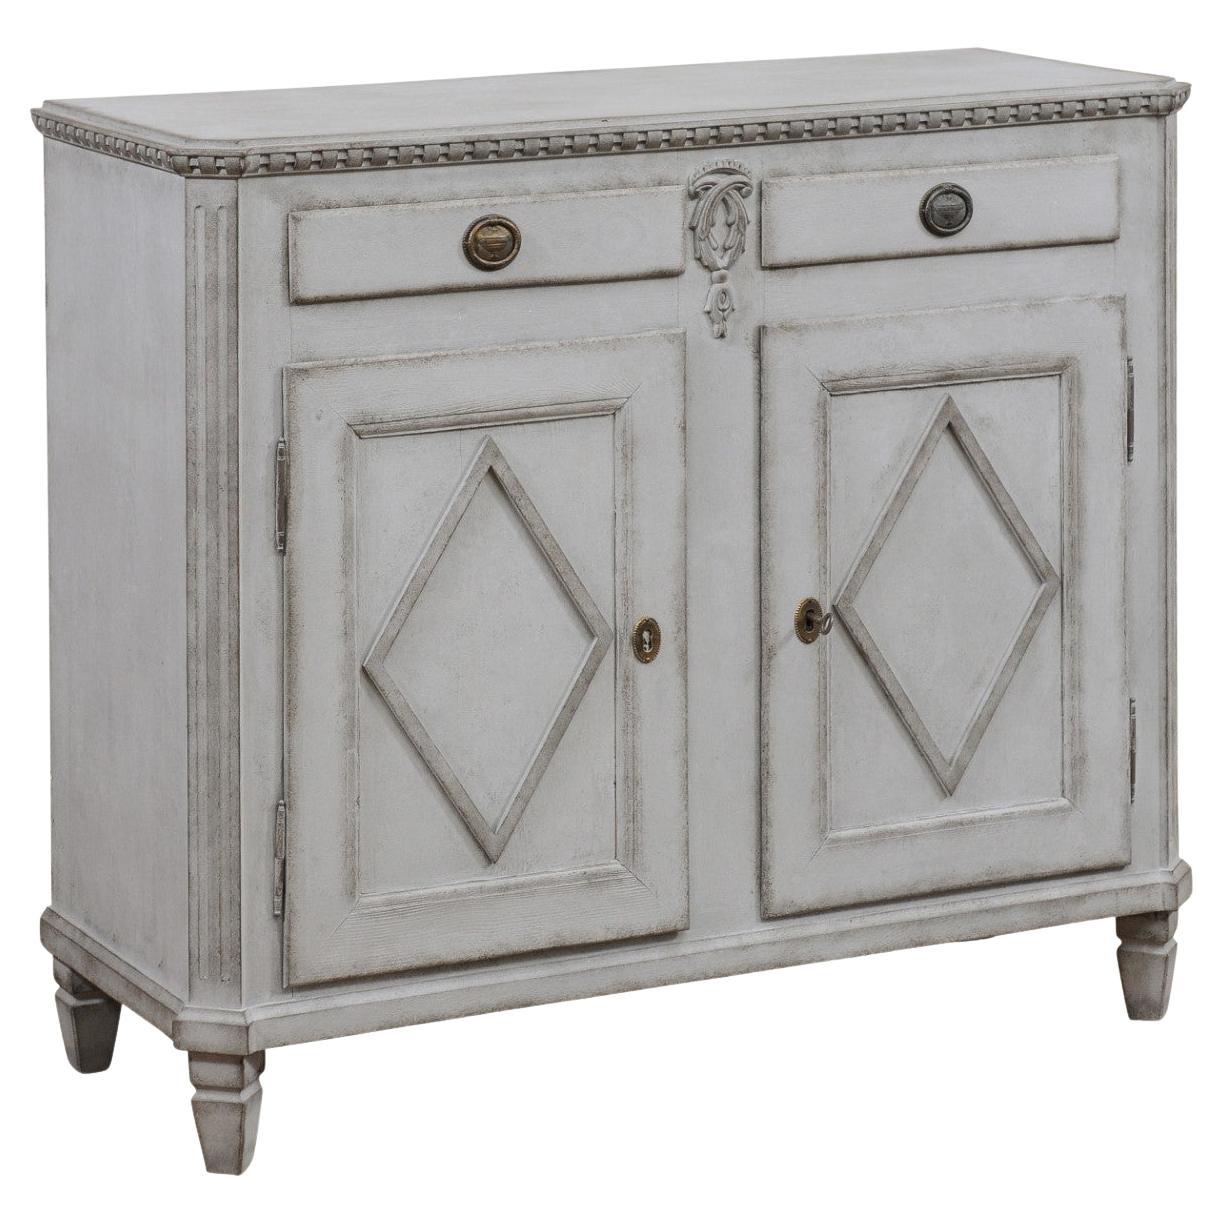 Swedish Late Gustavian 1830s Painted Sideboard with Two Drawers over Two Doors